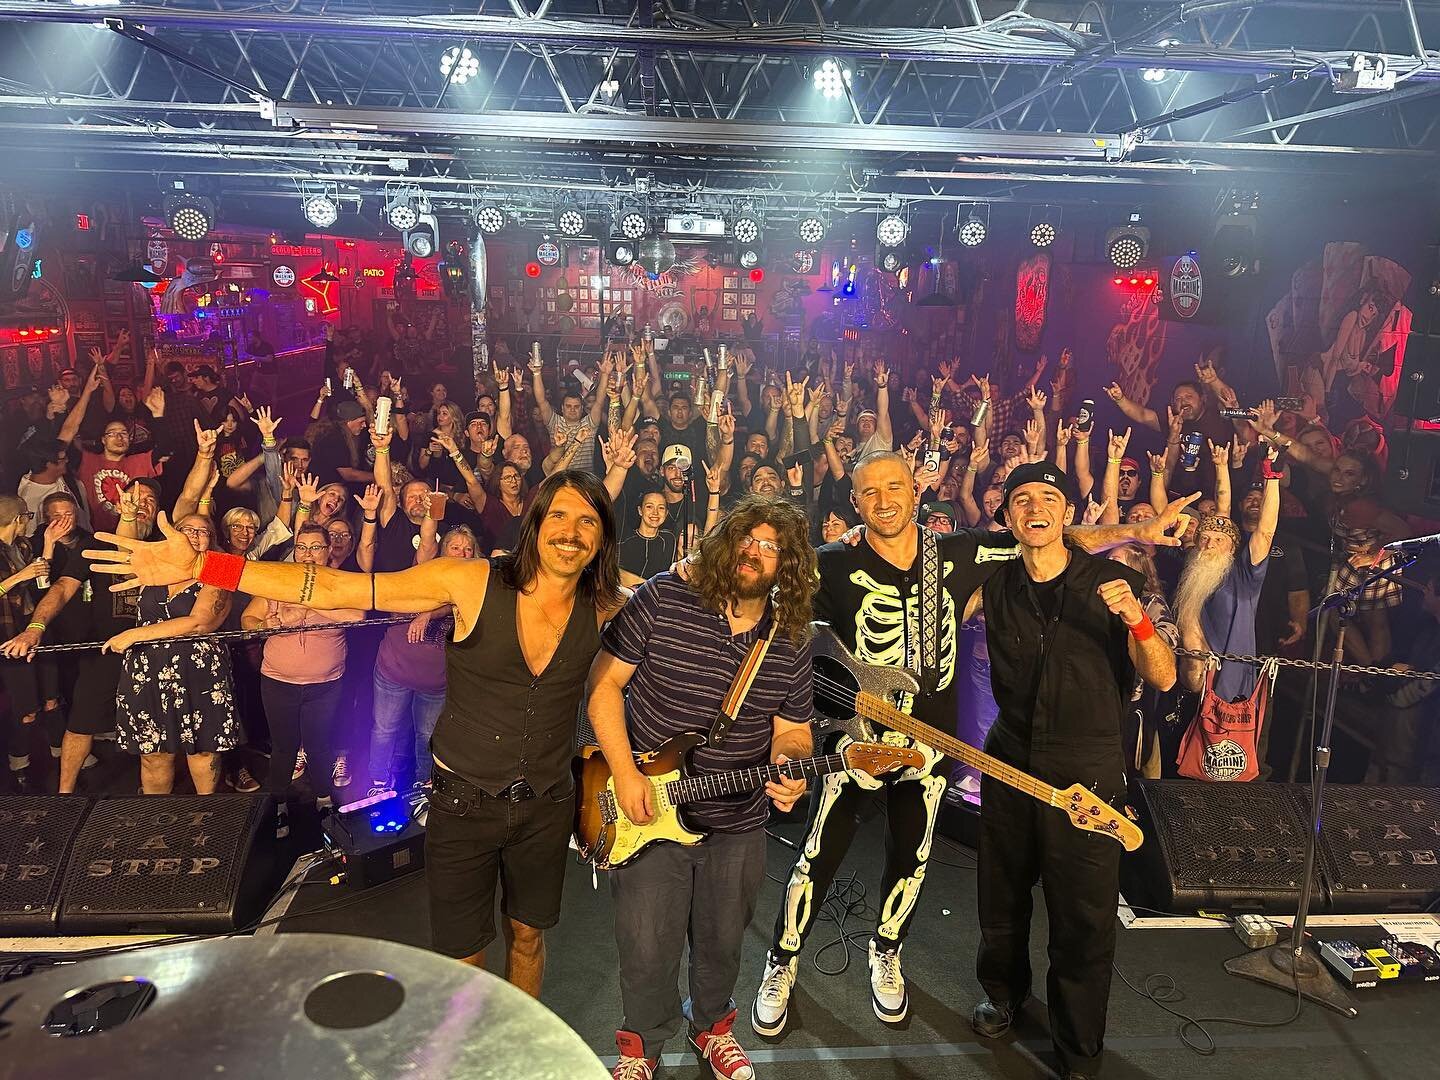 Once again, The Machine Shop was absolutely awesome last night. Electric. THANK YOU to all who came out. A huge shoutout to Failing Stars - The Smashing Pumpkins Tribute - we truly enjoyed meeting you all, and your set was killer. We hope to rock wit